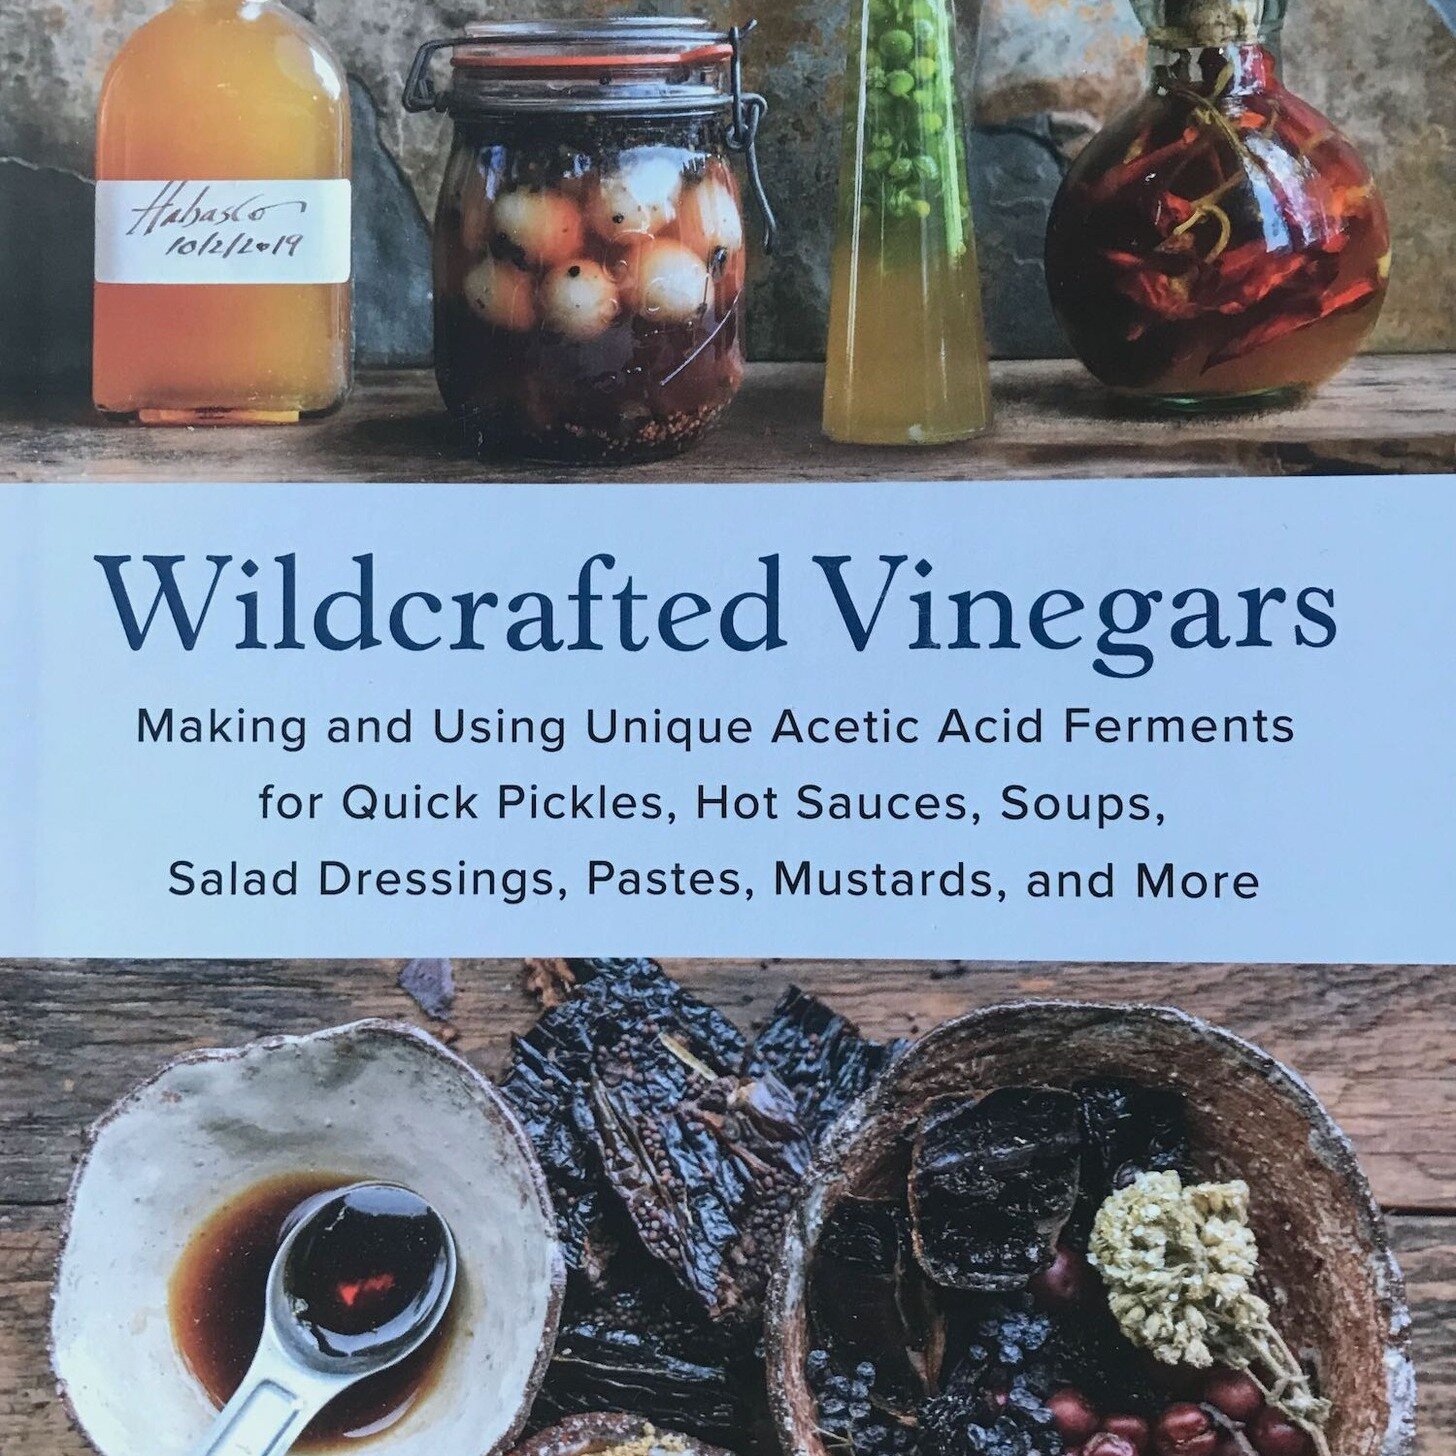 NEW ARRIVAL!! Pascal Baudar's latest book rounds out the collection of 4 incredibly beautiful and inspiring book about transforming wild foods into fine and nutritious cuisine.
All books on the Paleo Store currently 20% off with the checkout code Win